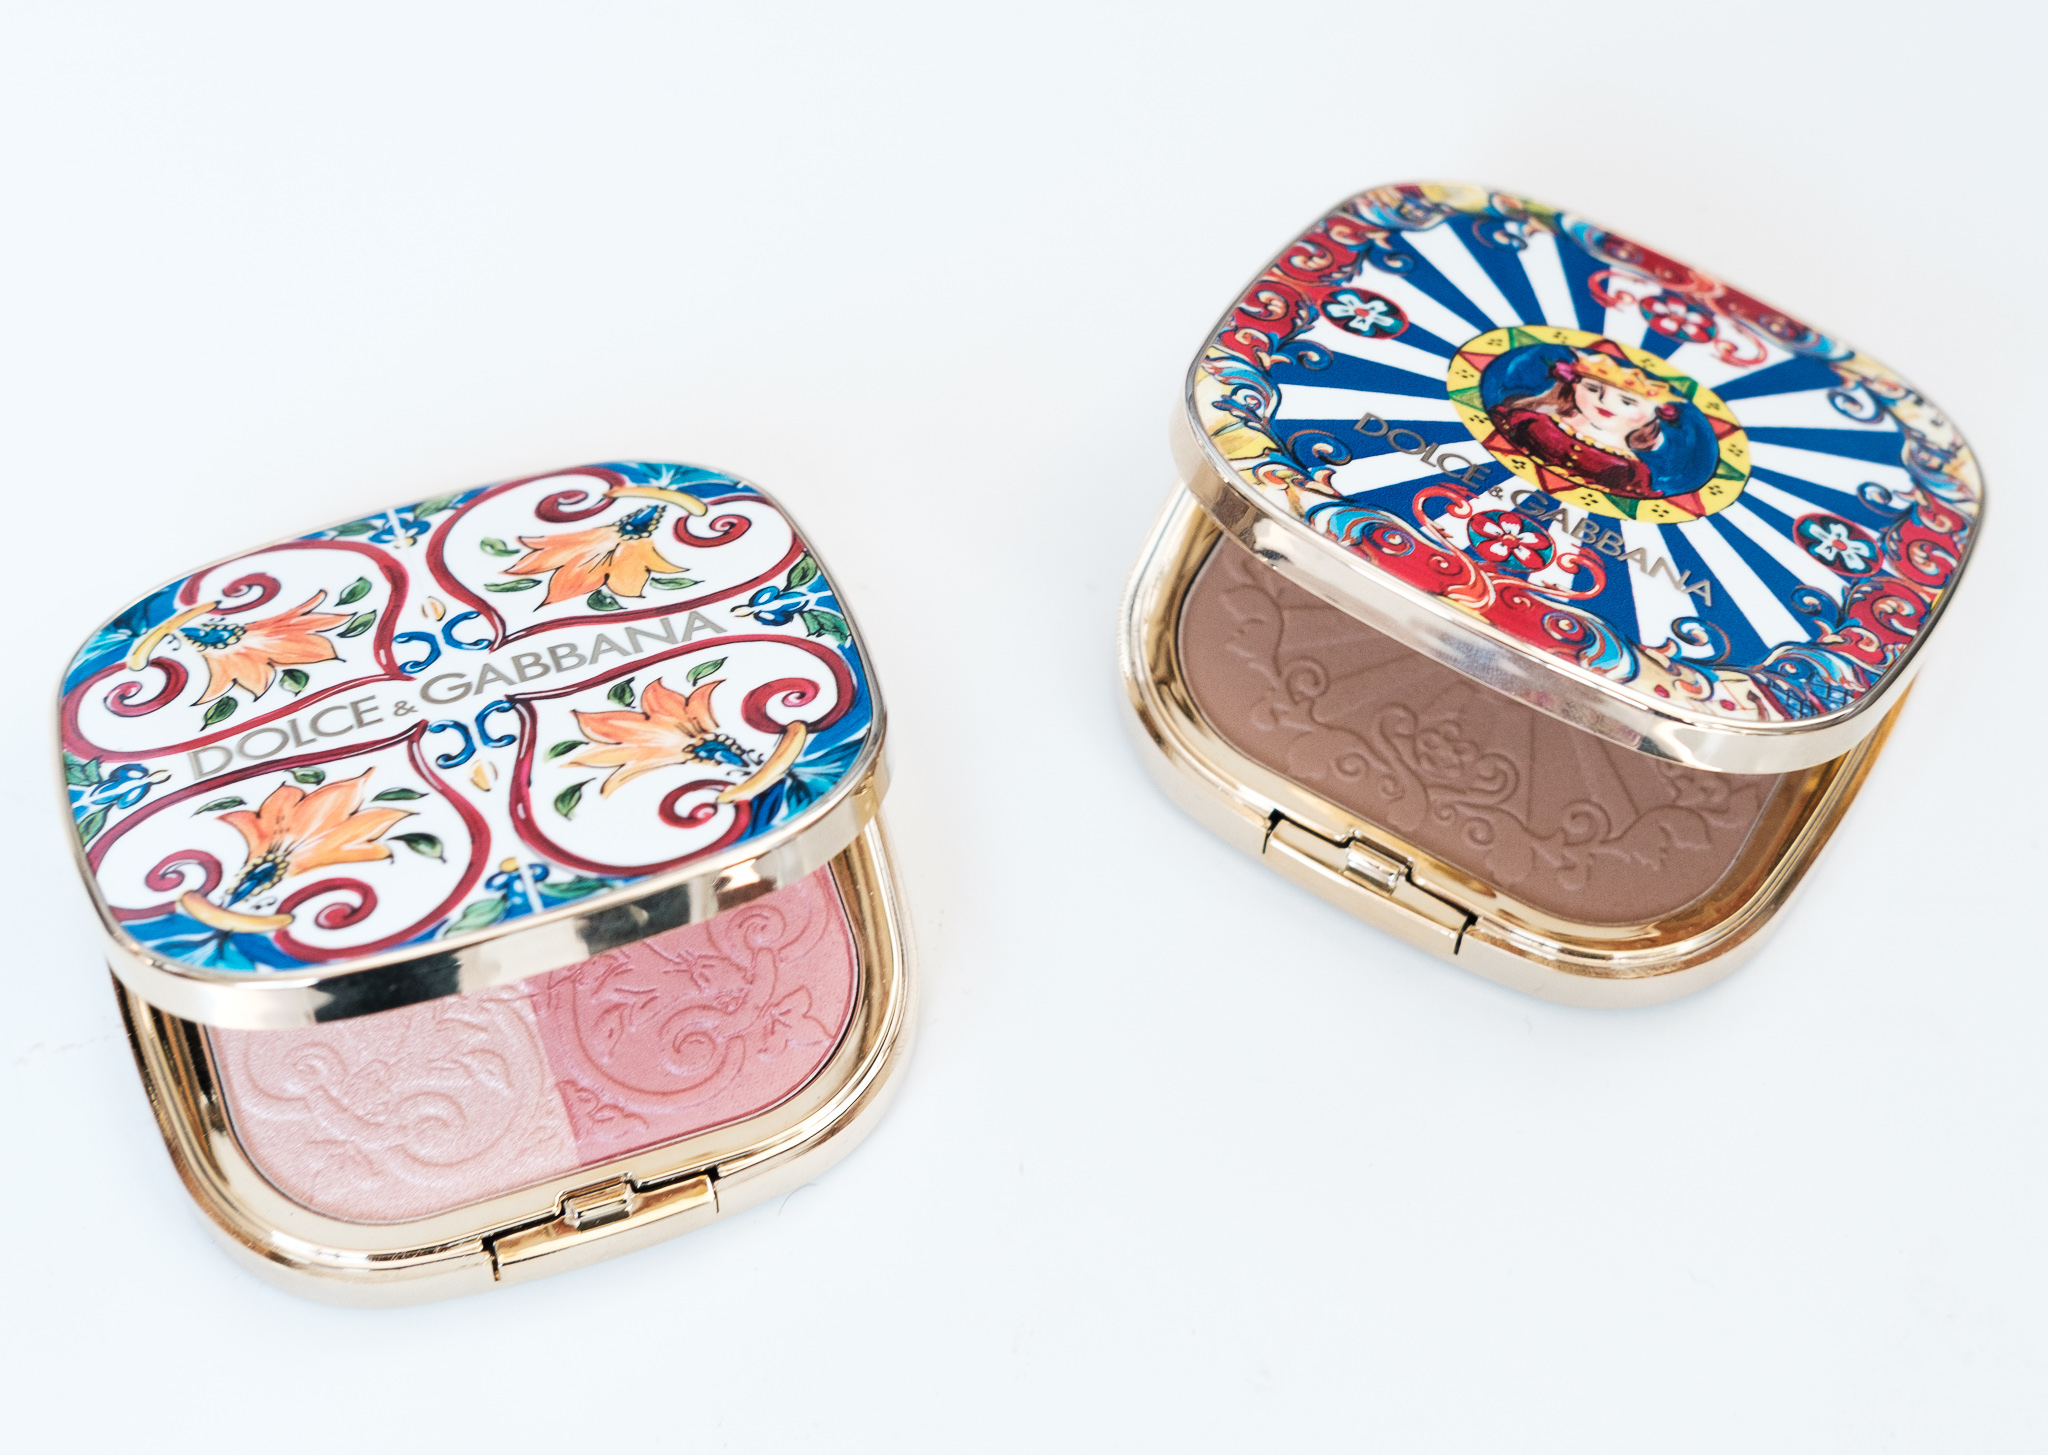 Review, Swatches | Dolce & Gabbana Glow: Bronzing Powder in Illuminating Powder Duo in Peach Blossom - Just head over, heels